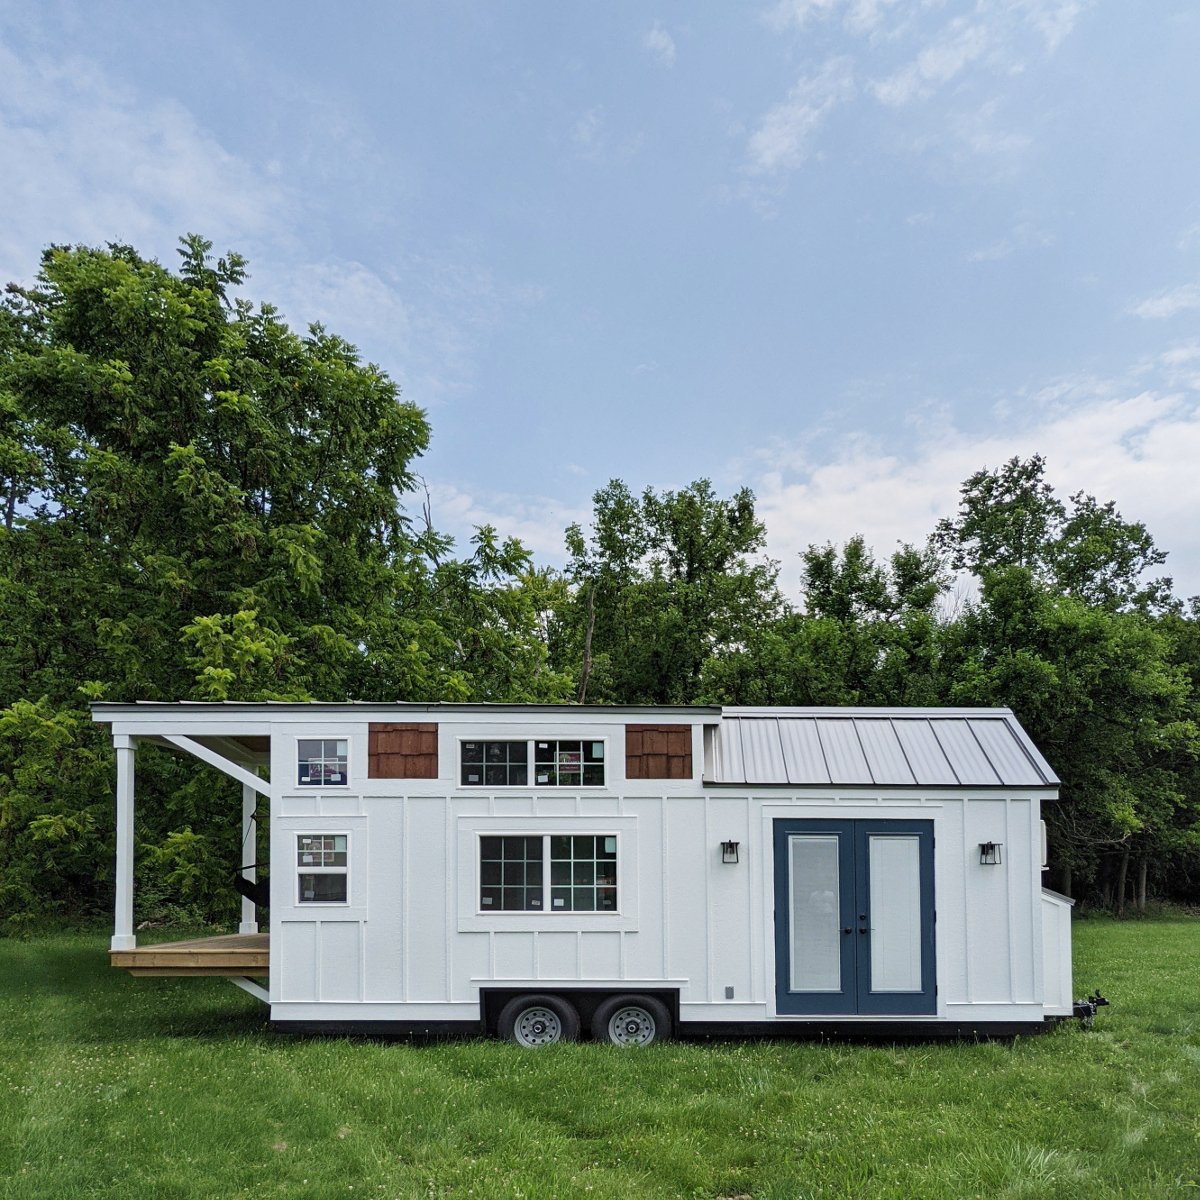 Custom Top-Rated Tiny Houses for Sale